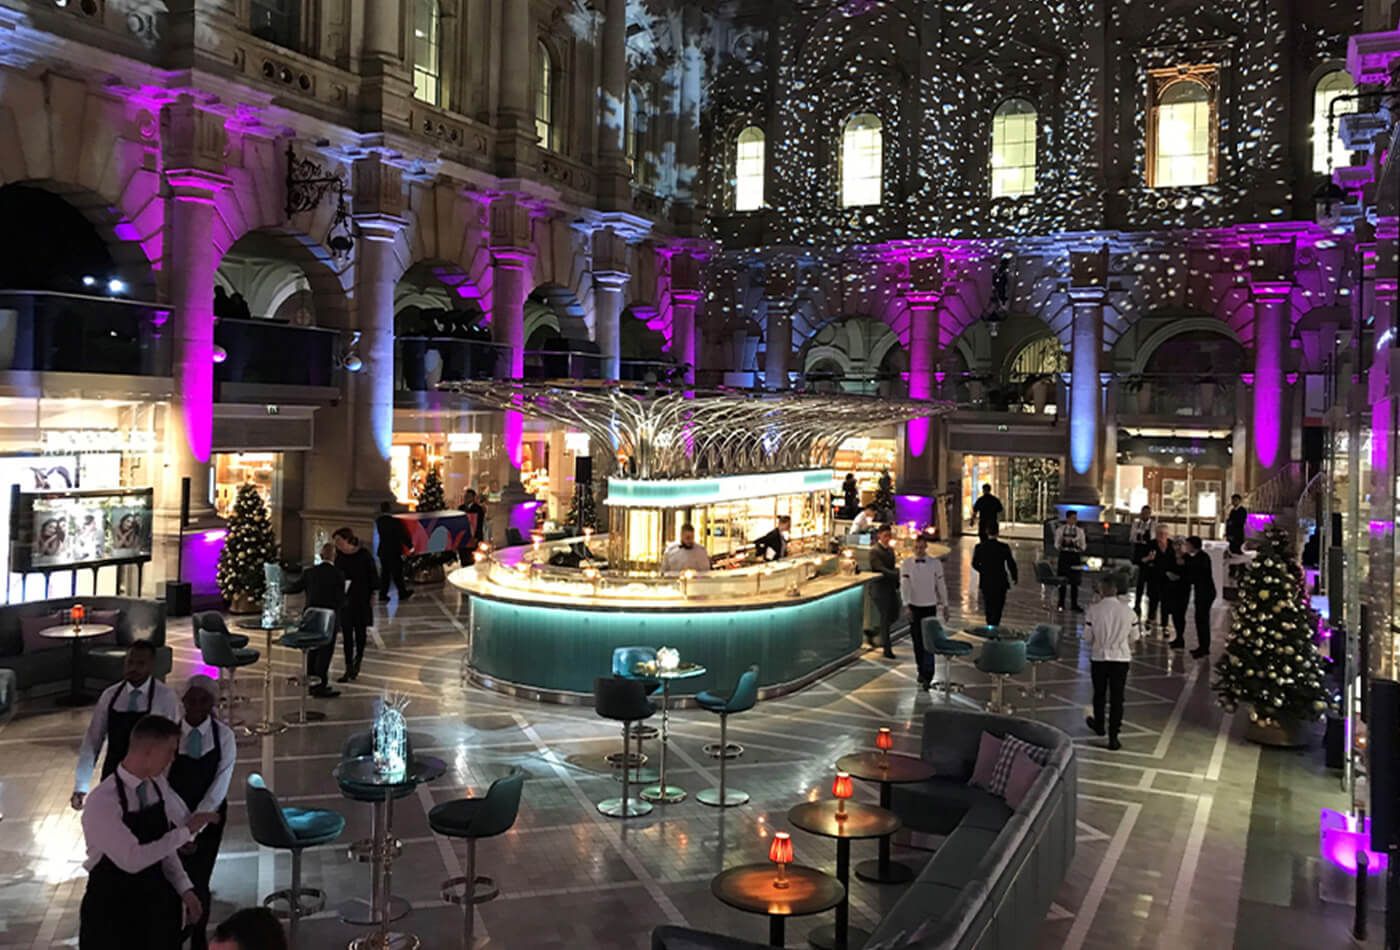 Courtyard and bar lit up in purple and turqouise